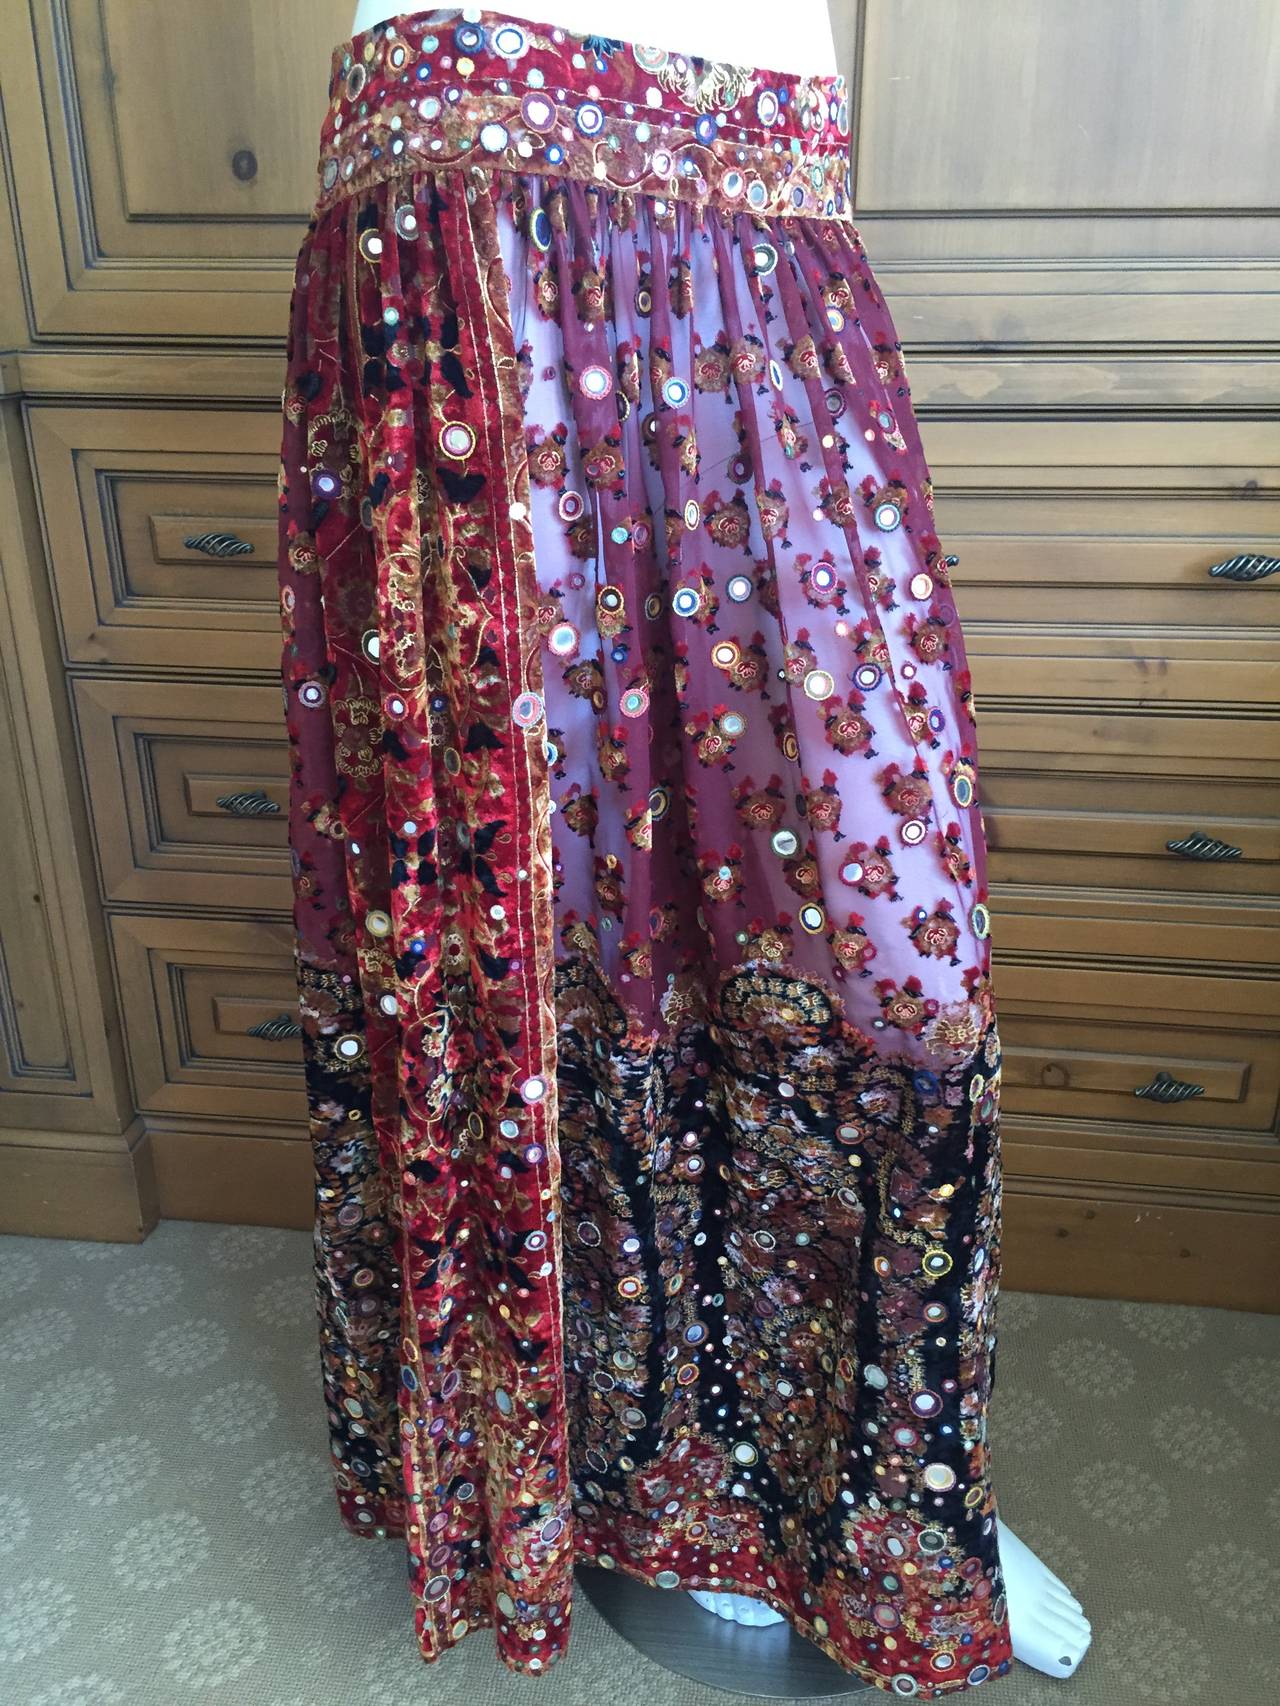 Oscar de la Renta Vintage Boho Gypsy Skirt with Mirrors.
This is wonderful, cut out velvet with mirror details, sheer in the front.
Marked size 4 but seems to run large
Waist 34